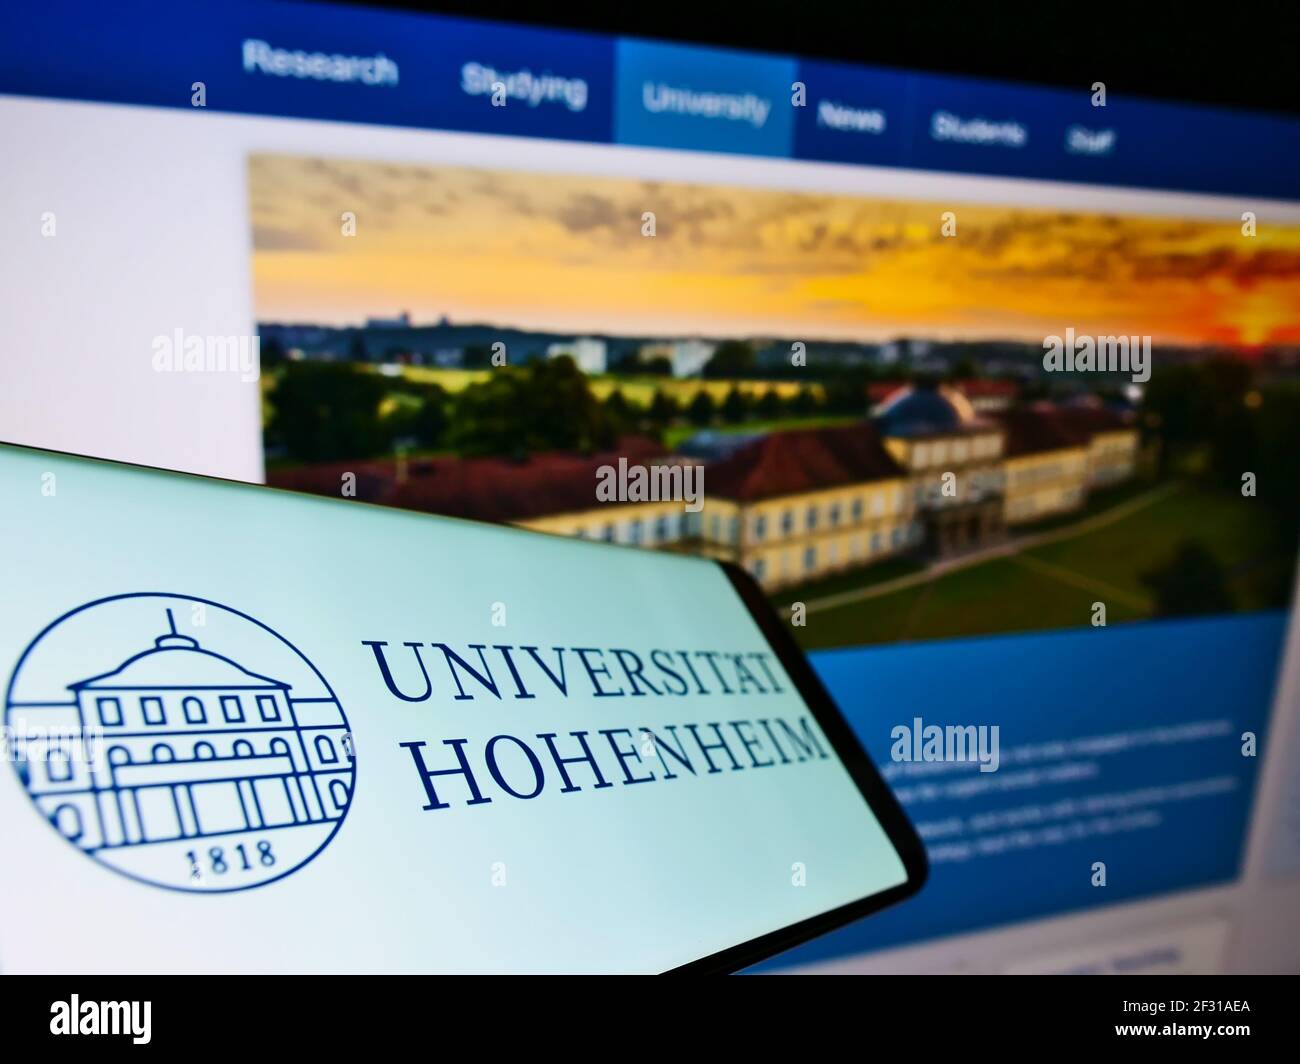 Smartphone with logo of German education institution Universität Hohenheim on screen in front of web page. Focus on center-left of phone display. Stock Photo